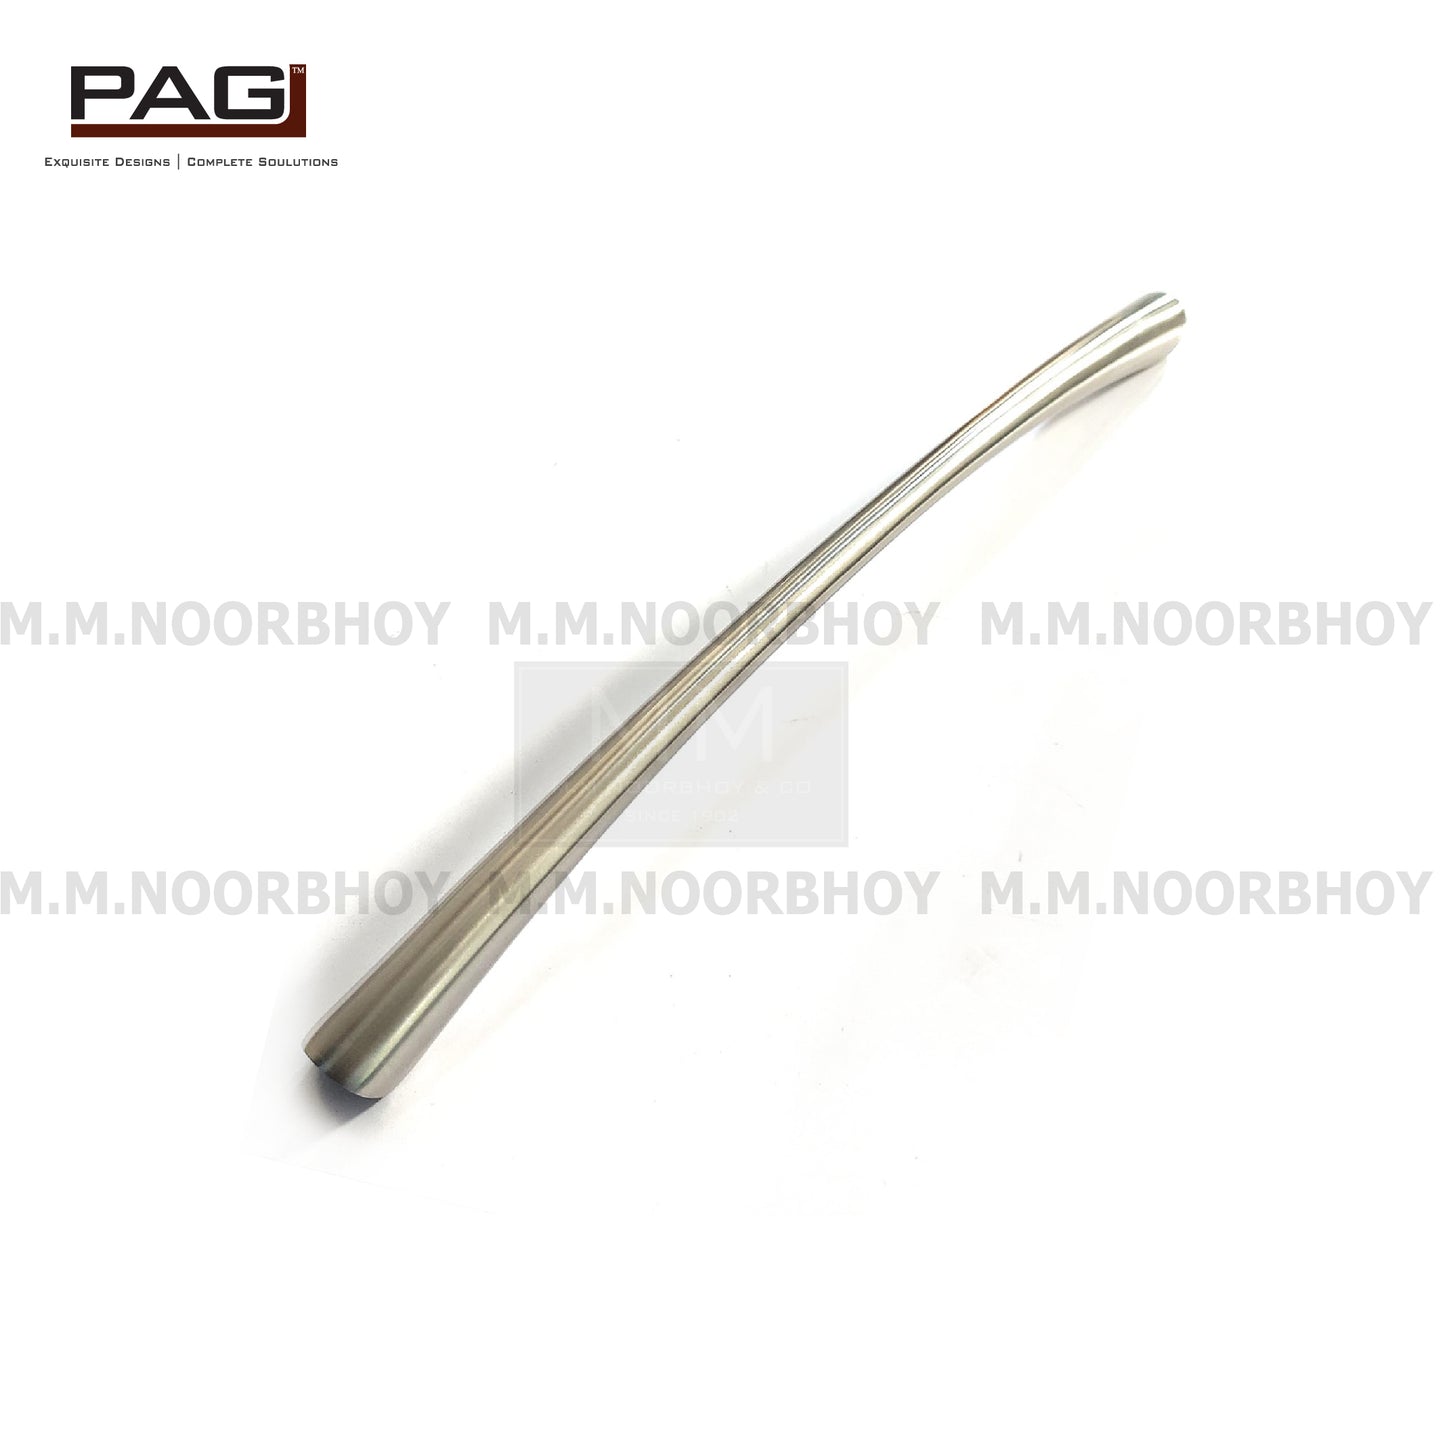 Pag Cabinet Handles , Size 96mm,128mm,160mm,224mm & 288mm , Zinc Antique Bronze & Stainless steal Finish - P2631